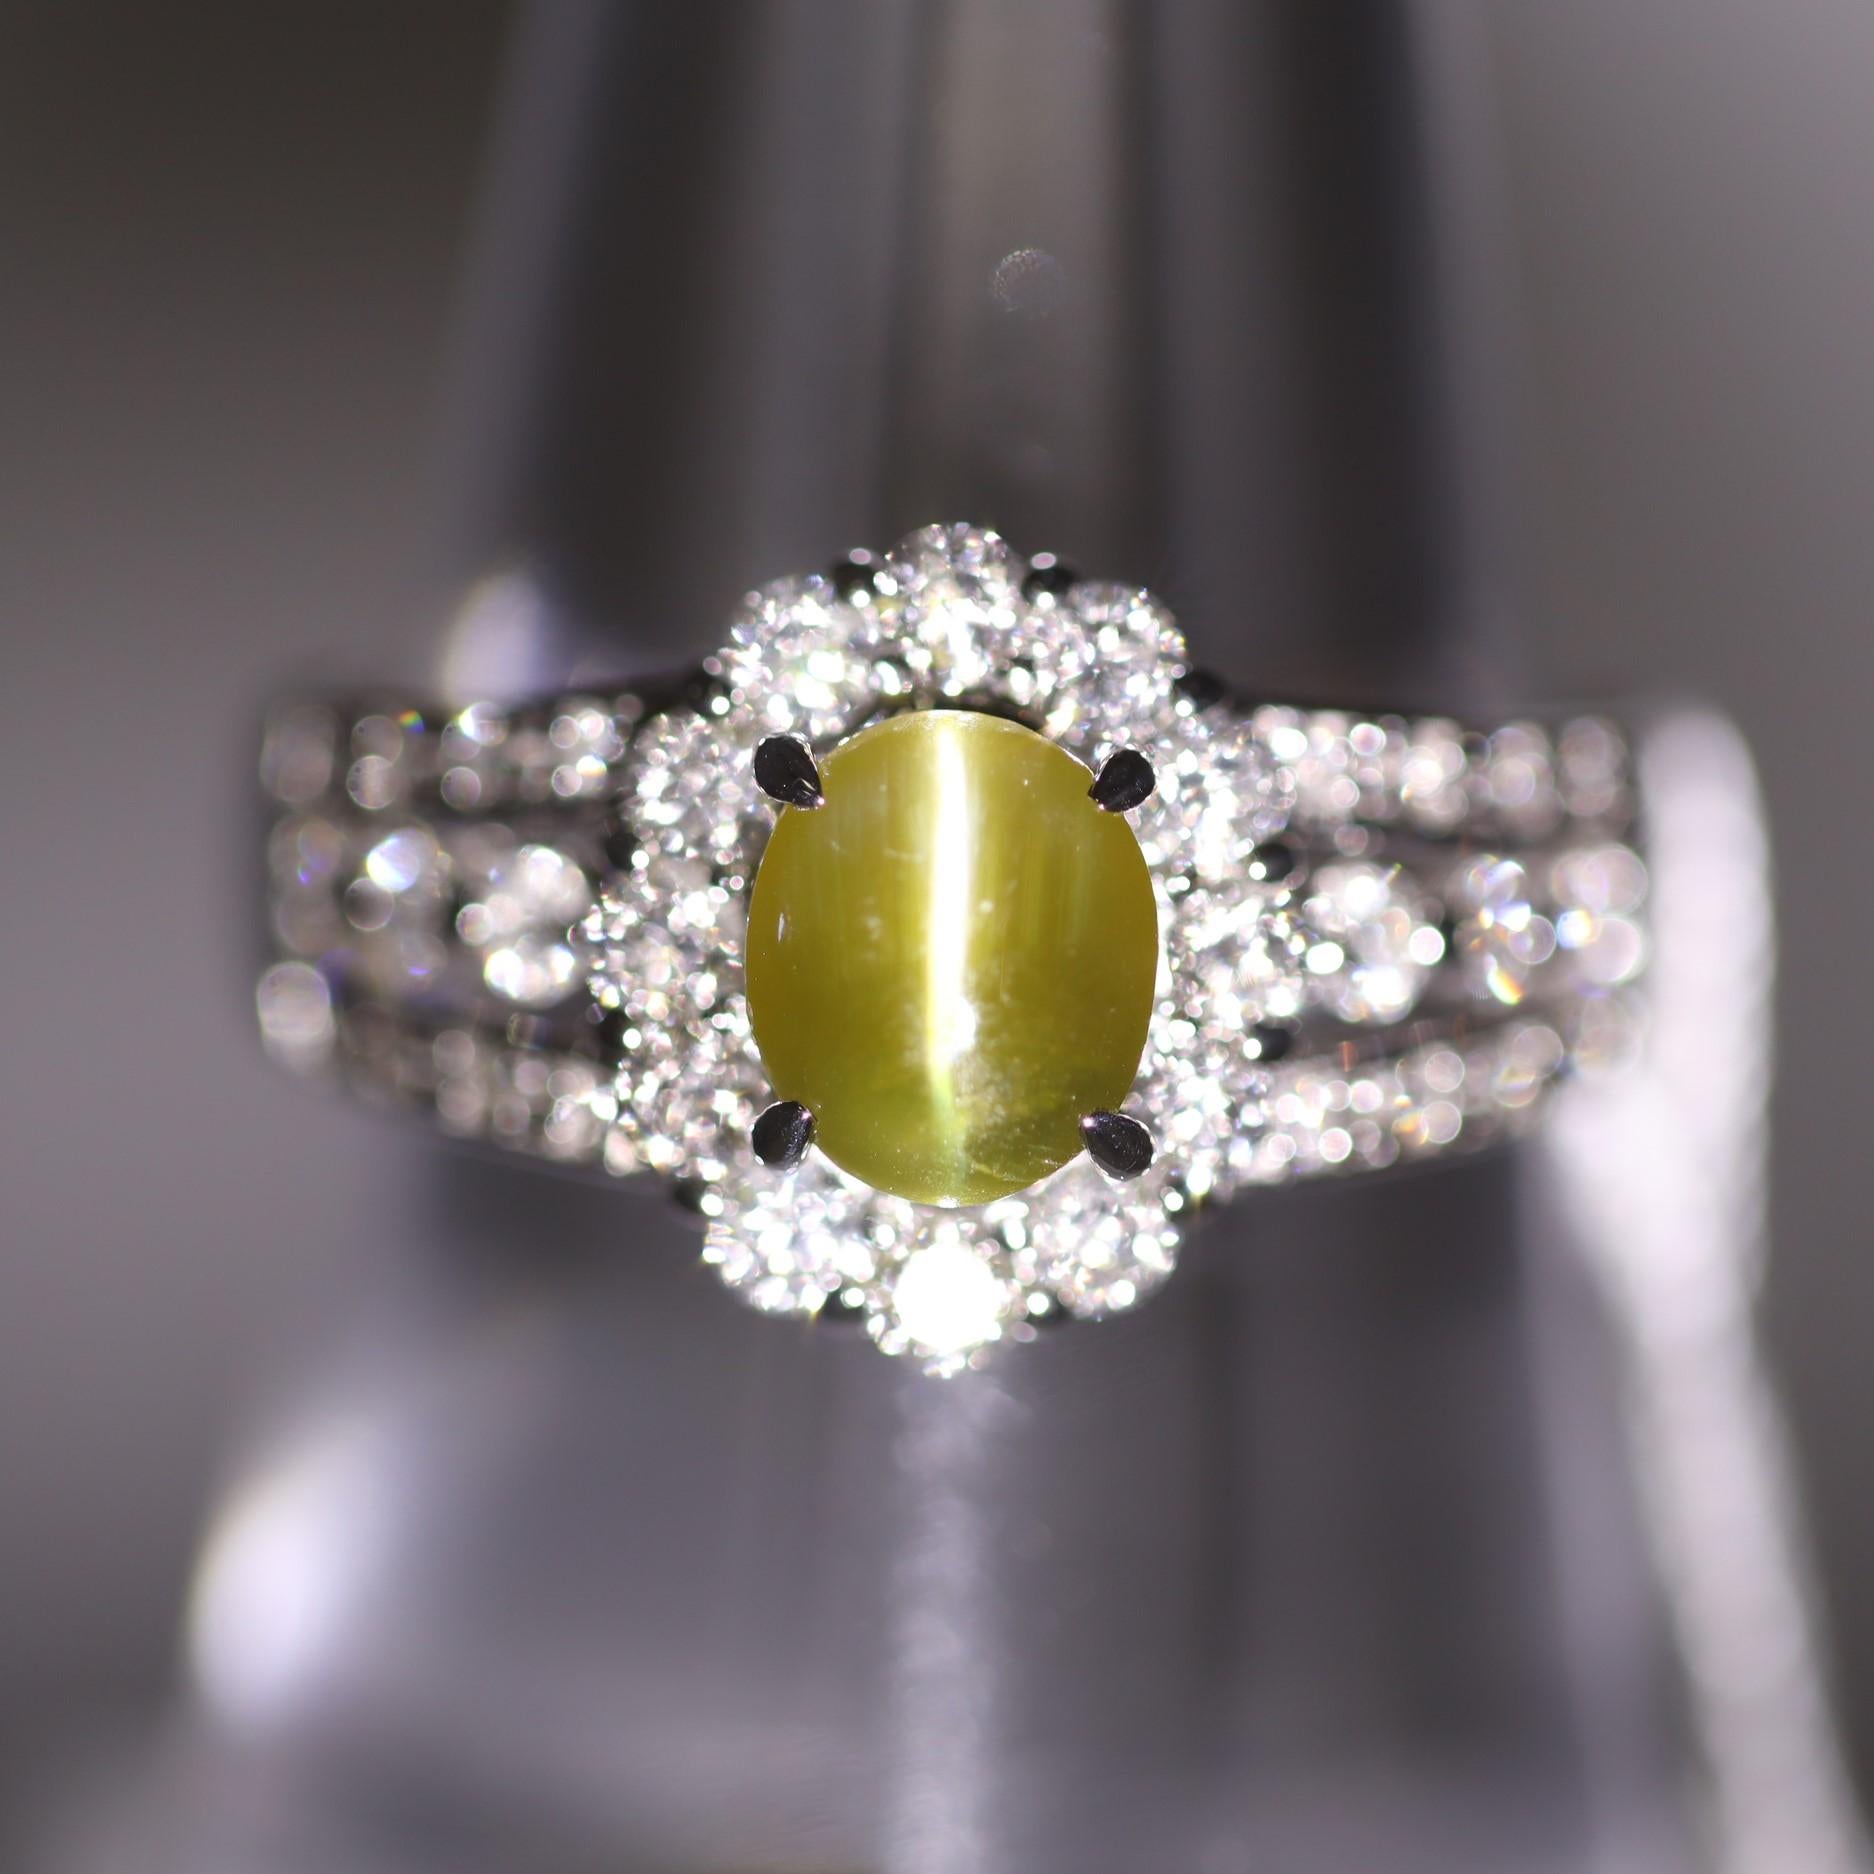 A beautiful ring featuring a sleek and sexy cats eye chrysoberyl weighing 1.33 carats. It has the ideal “milk and honey” color with a strong eye running down the middle. It is accented by 0.71 carats of round brilliant-cut diamonds which halo the